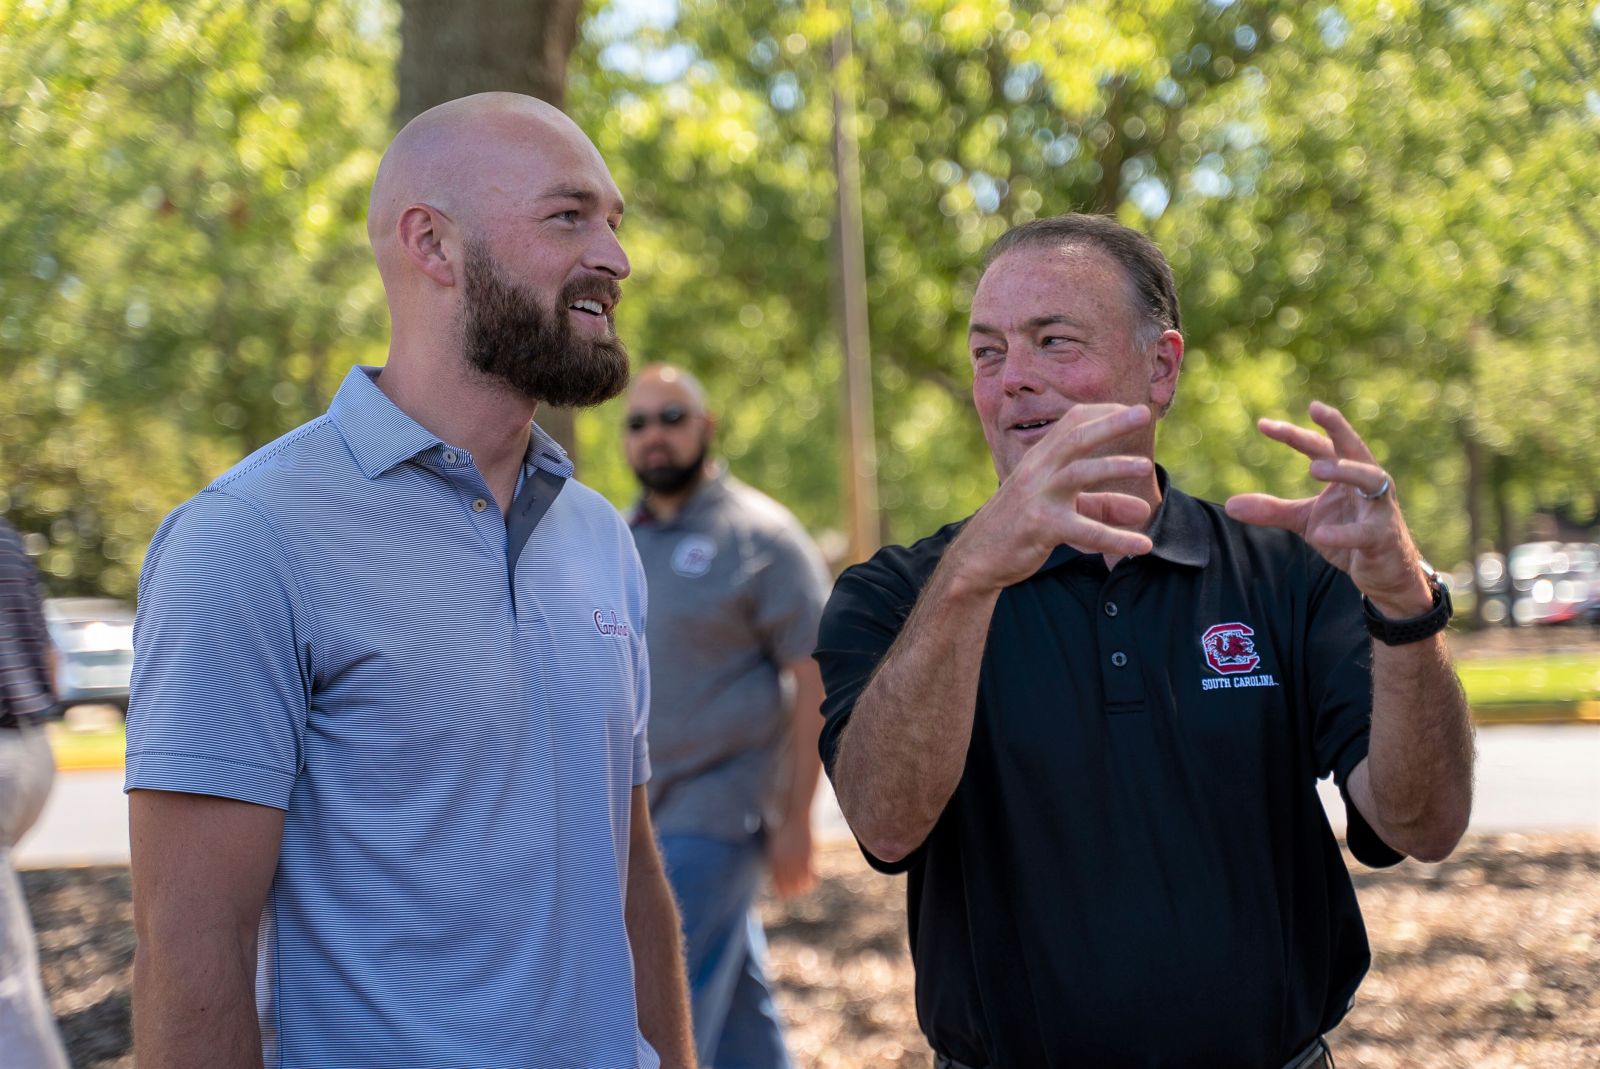 Former USC quarterback Connor Shaw talks with Colonial Life CEO Tim Arnold on Thursday. (Photo/Provided)